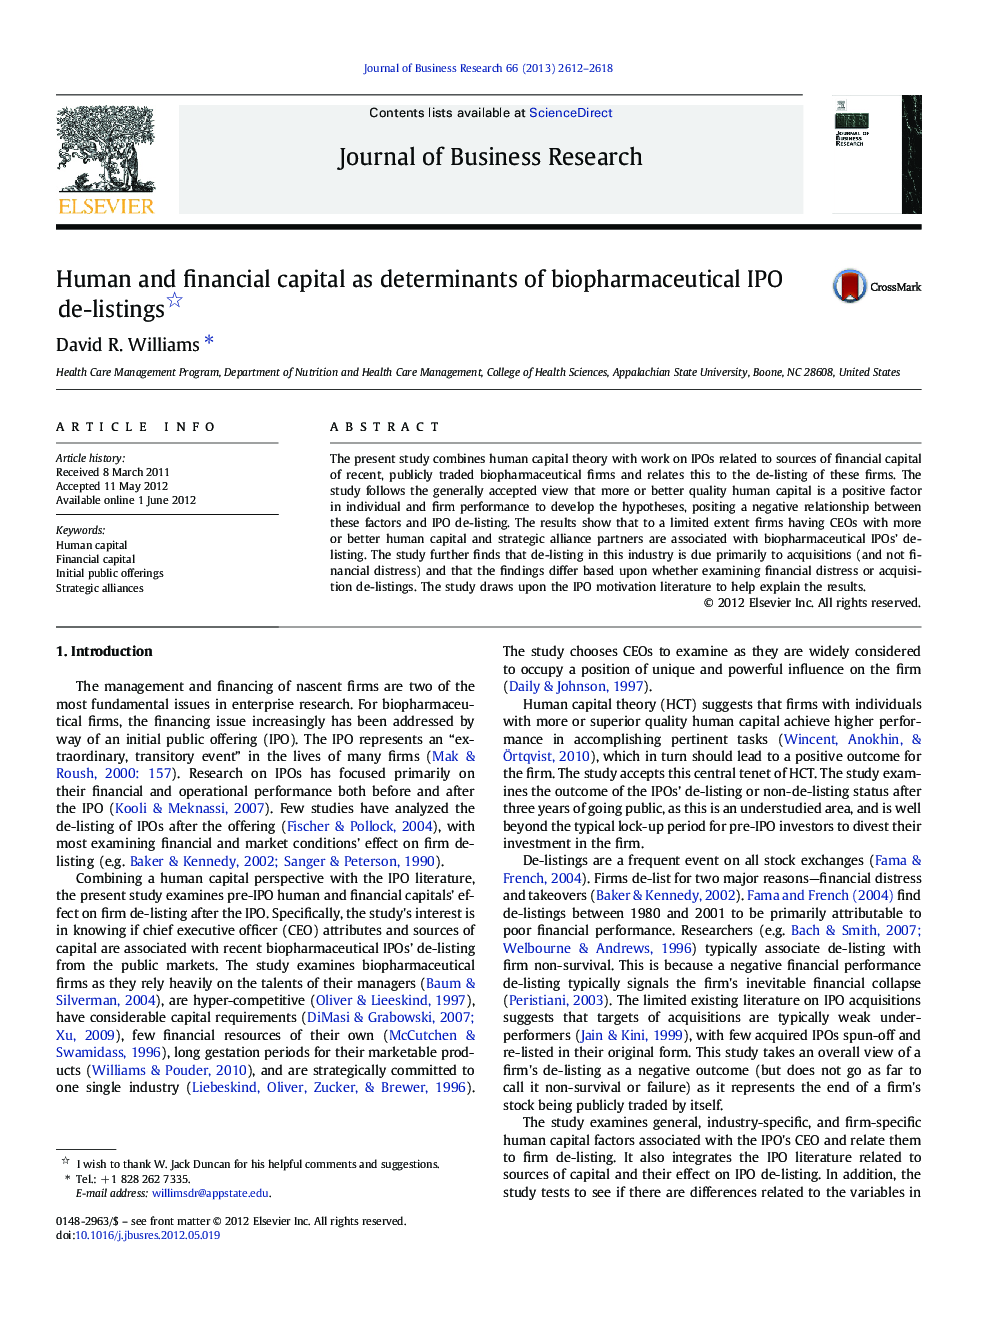 Human and financial capital as determinants of biopharmaceutical IPO de-listings 